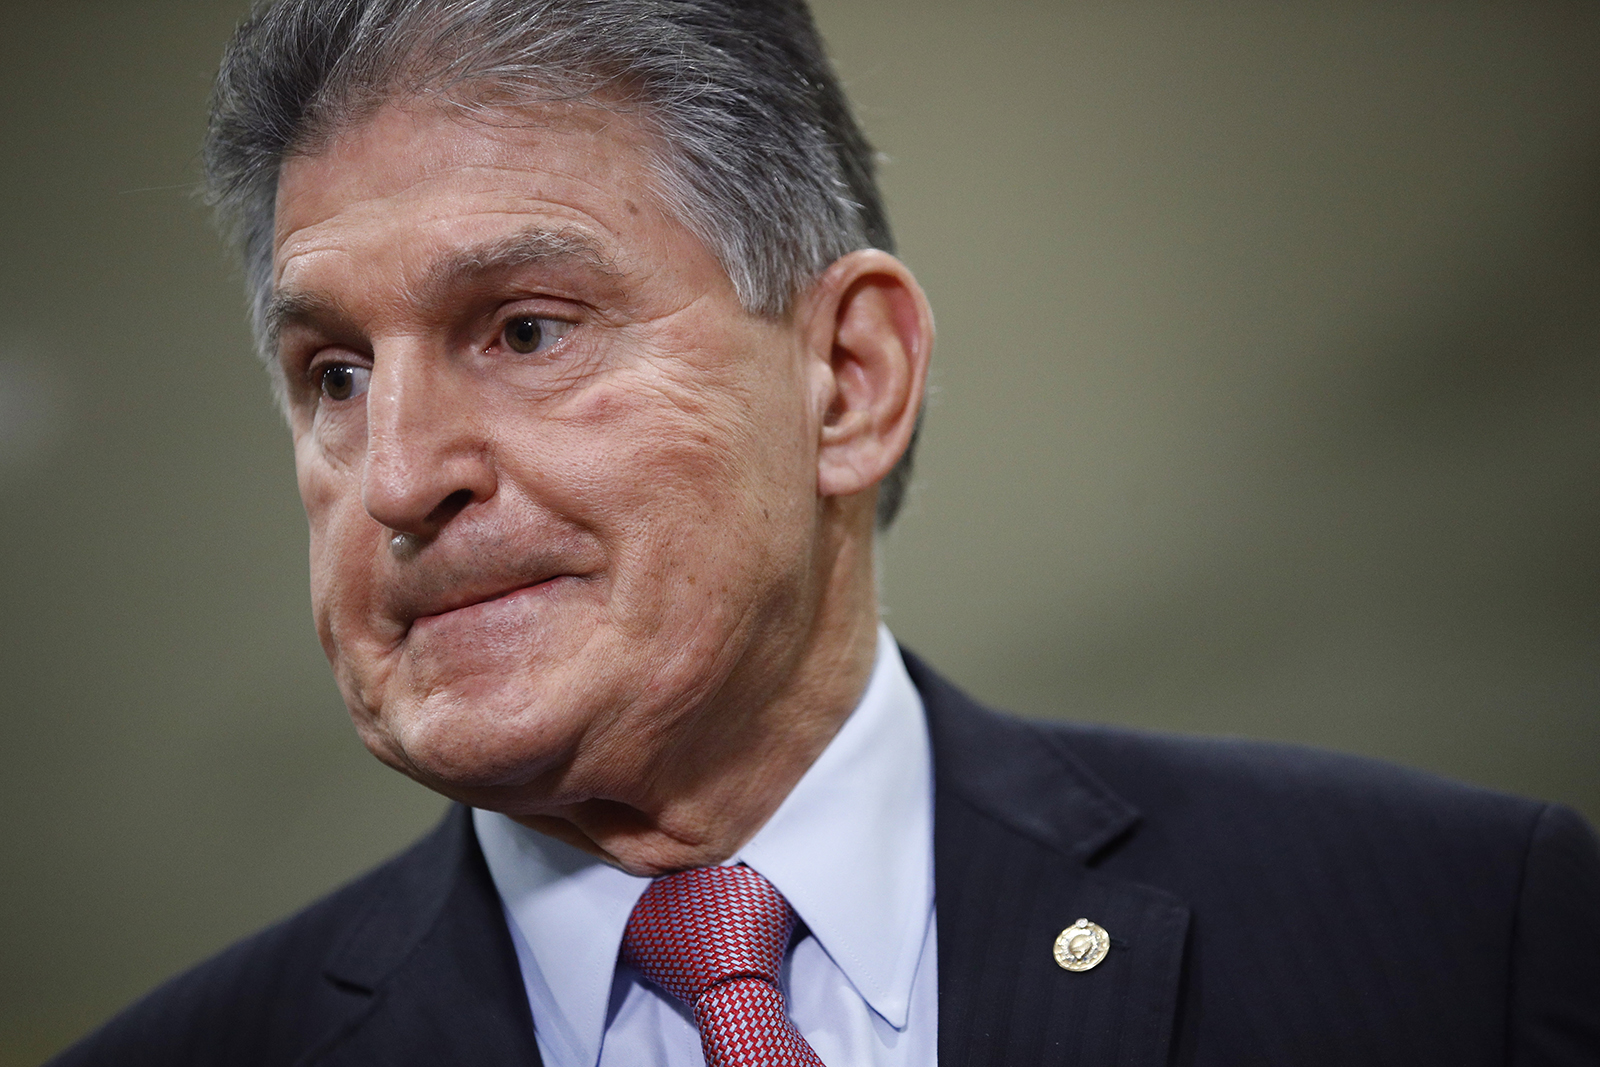 In this February 5 file photo, Sen. Joe Manchin speaks with reporters on Capitol Hill in Washington.